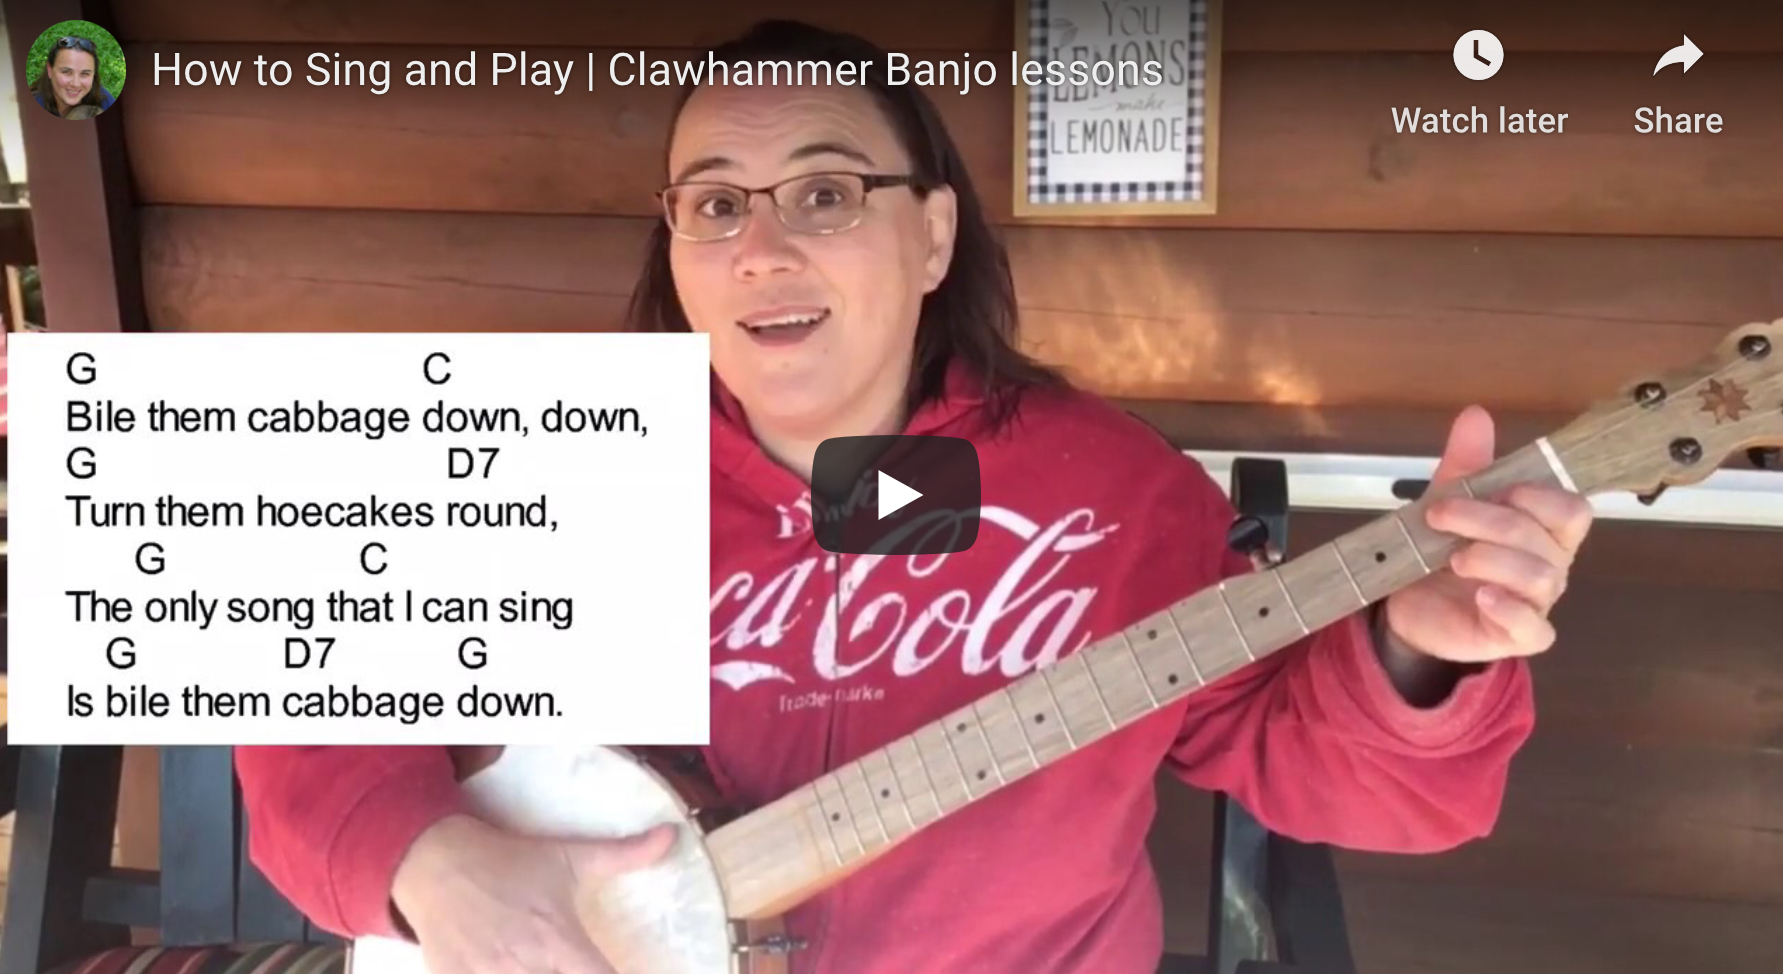 How To Sing and Play Banjo